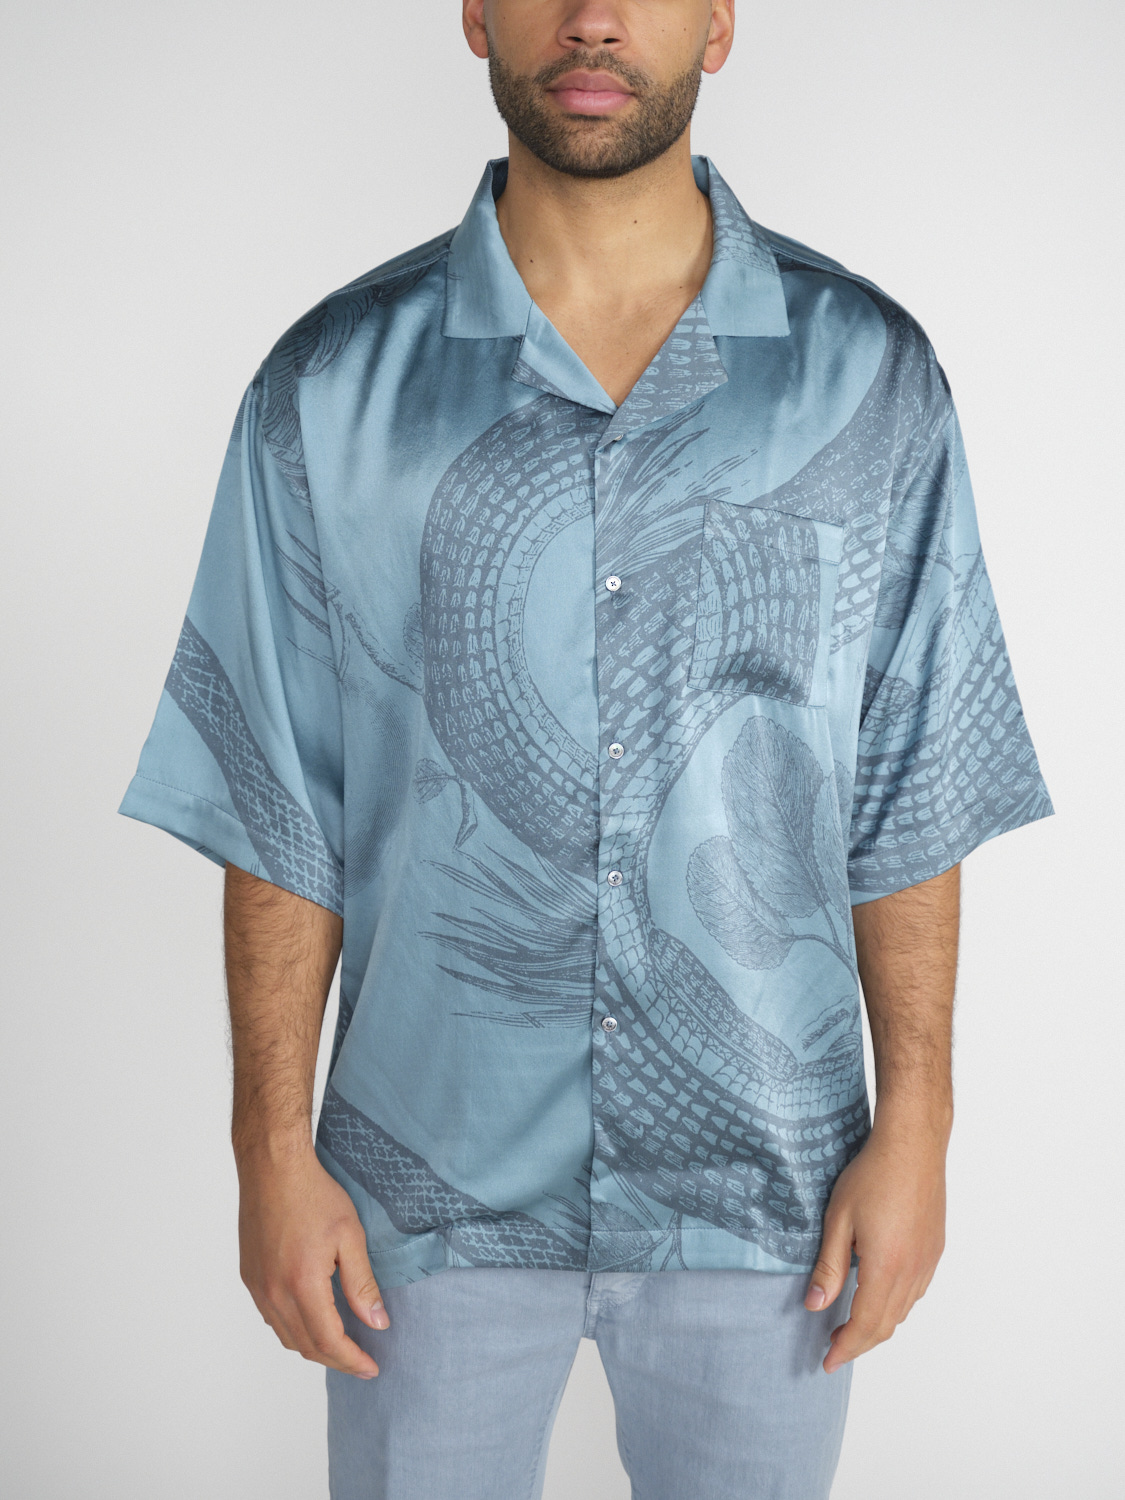 friendly hunting Chemise Grow – silk shirt with a heavenly pattern  mint S